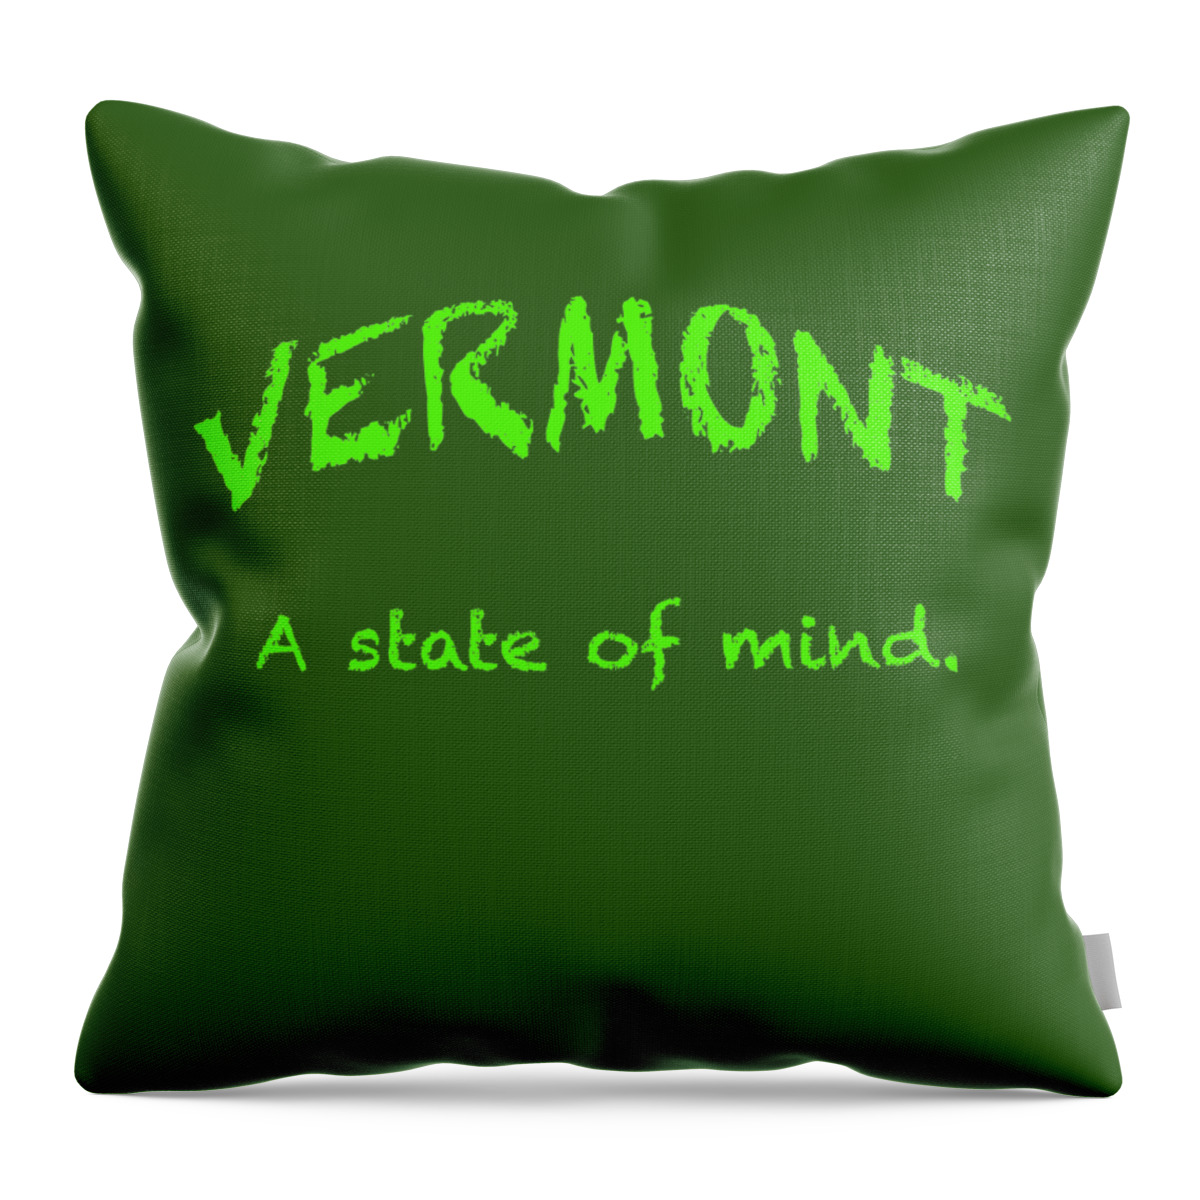 Vermont Throw Pillow featuring the digital art Vermont, A State of Mind #2 by George Robinson